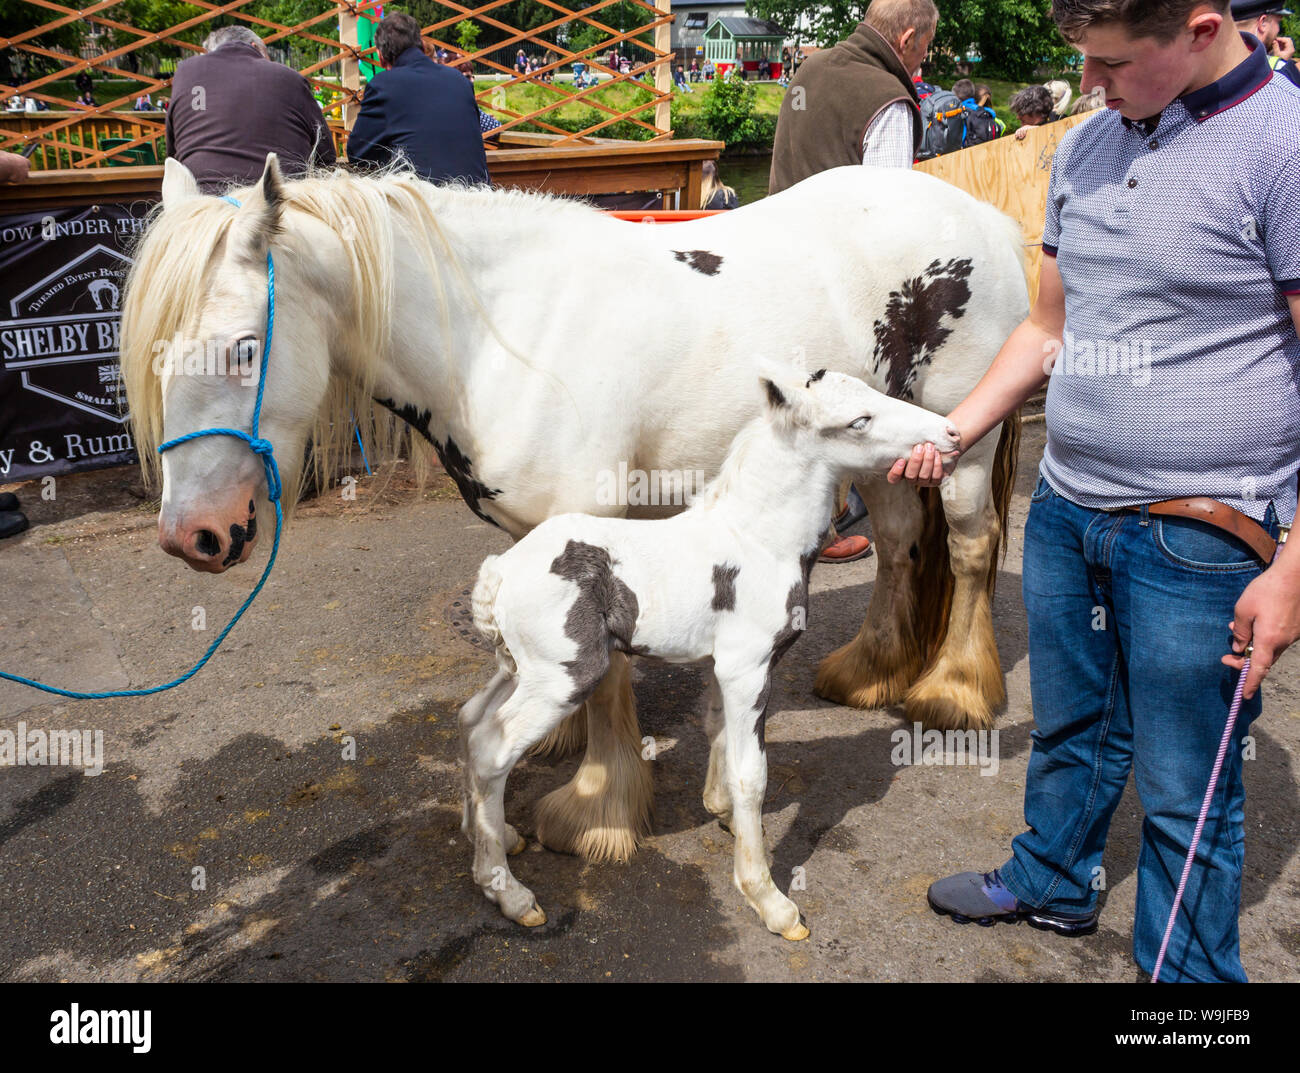 Appleby-in-Westmorland in Cumbria, England.  The Appleby Horse Fair, an annual gathering of Gypsies and Travellers and their horses.  A young boy show Stock Photo